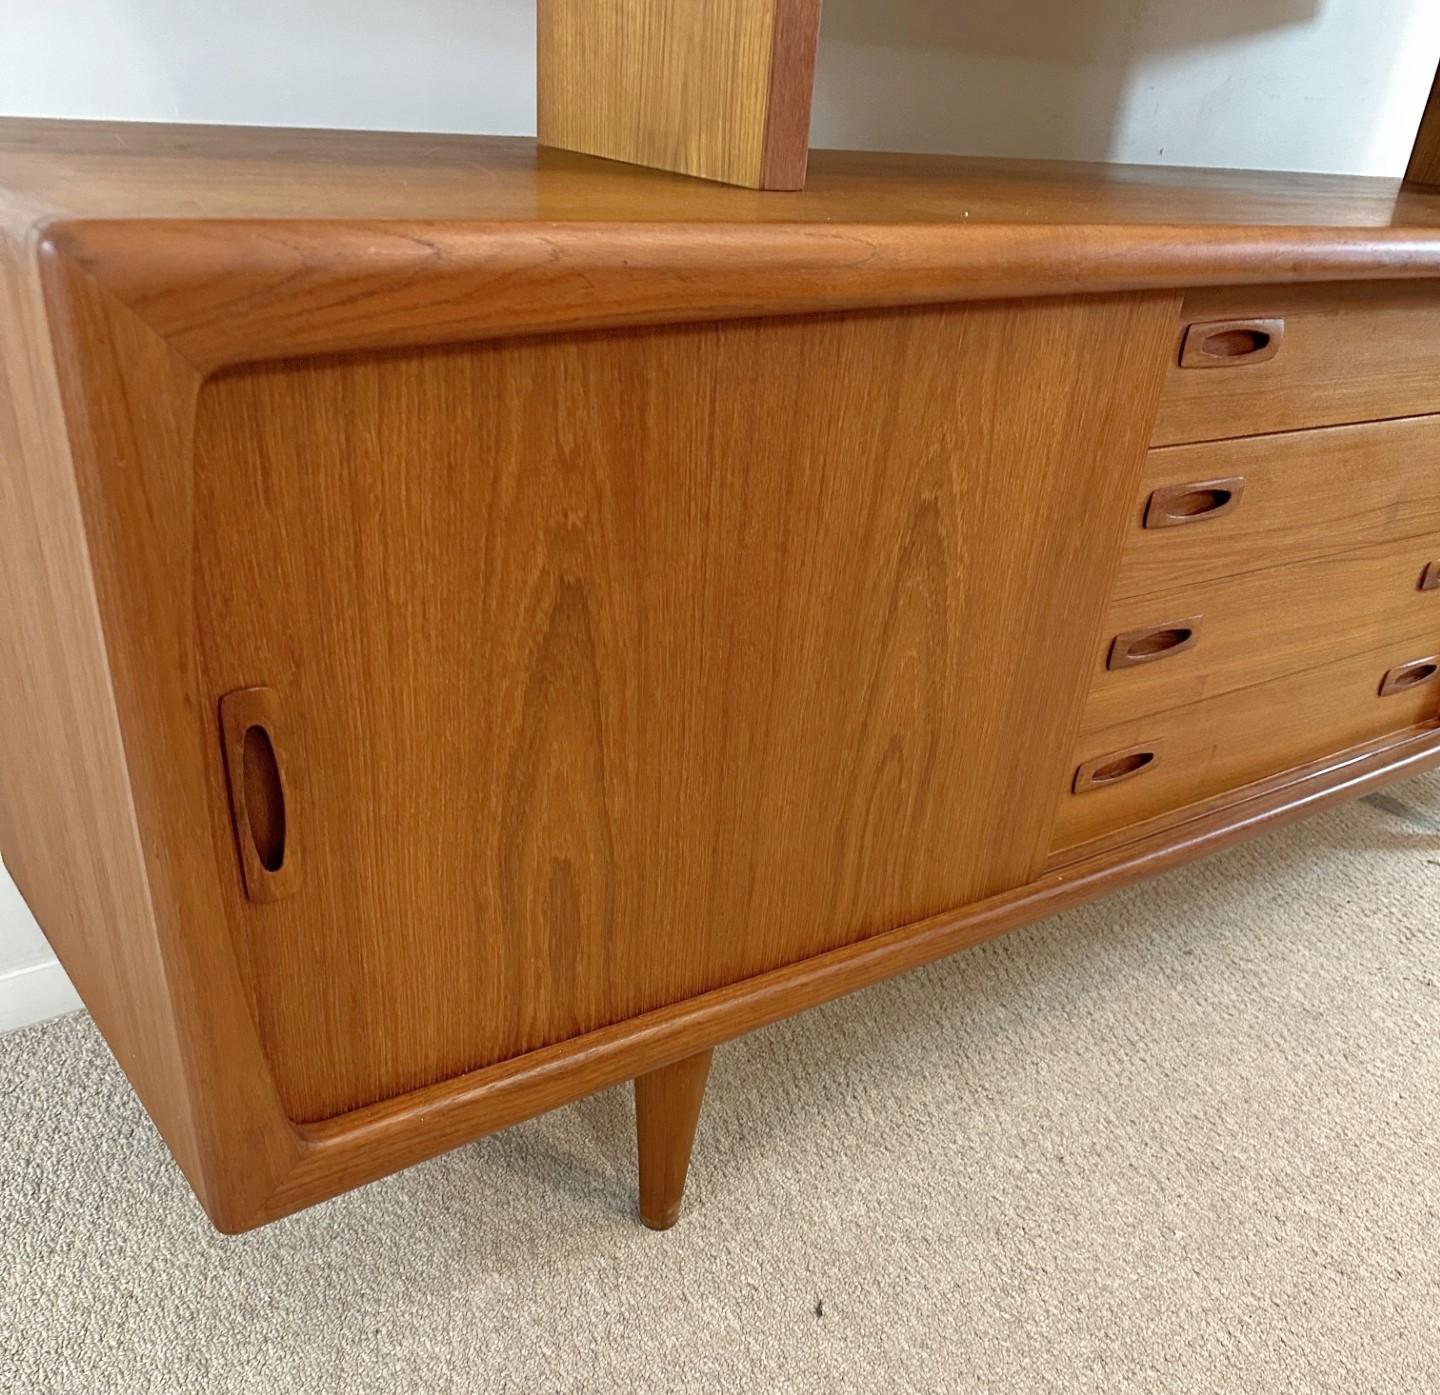 H.P. Hansen Teak Credenza with Hutch, circa 1960s. Scandinavian Style. Danish modern credenza and china display hutch will give you all the storage and display you could want. The hutch has glass sliding doors and sits upon shaped legs that rest